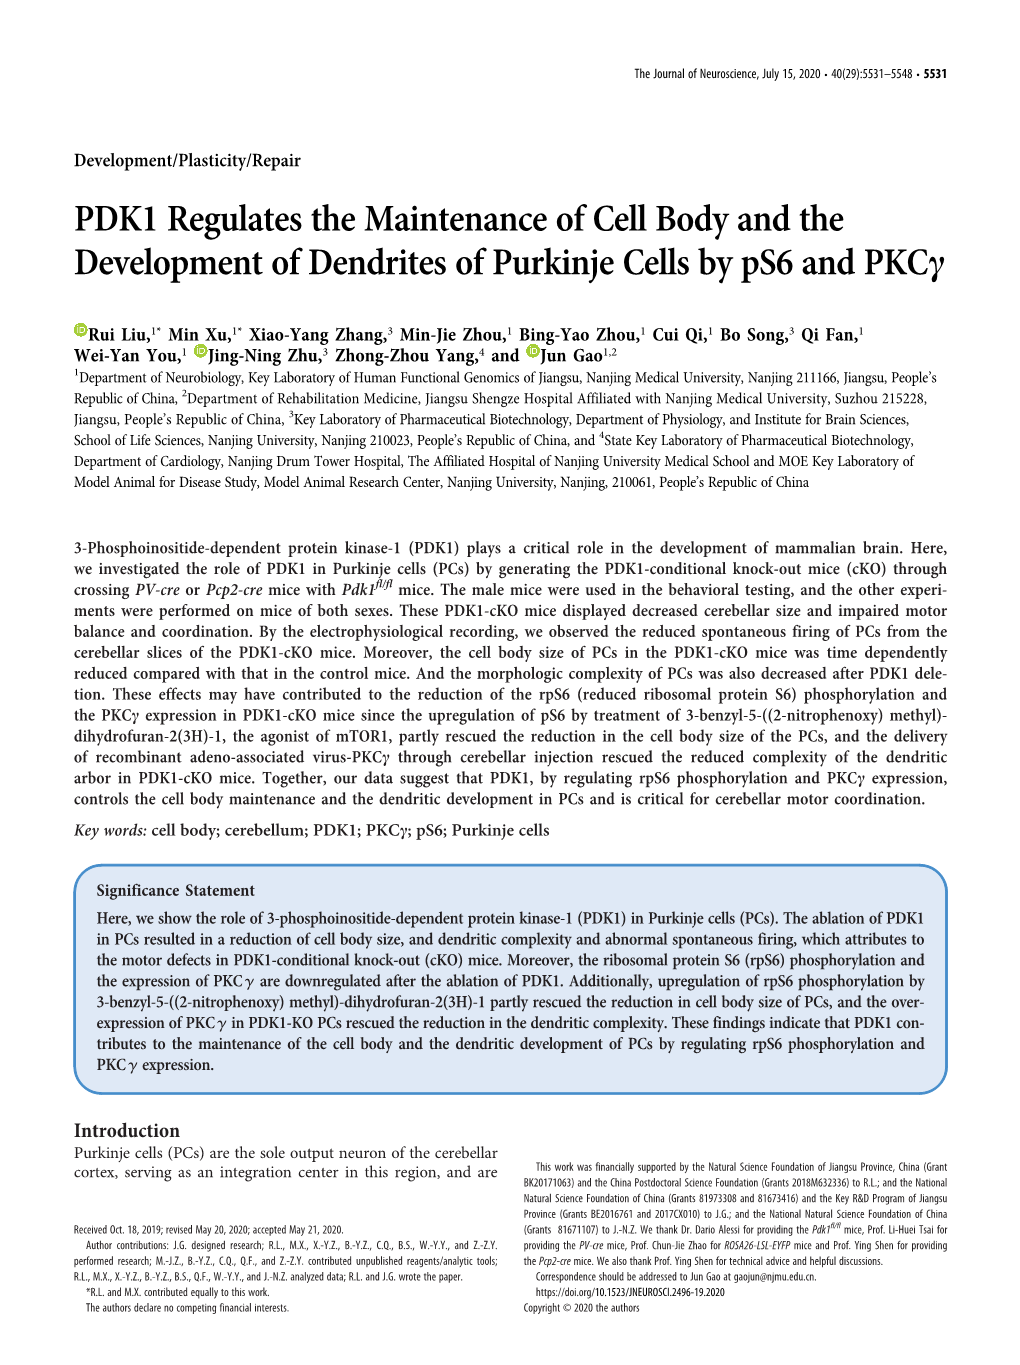 PDK1 Regulates the Maintenance of Cell Body and the Development of Dendrites of Purkinje Cells by Ps6 and Pkcc